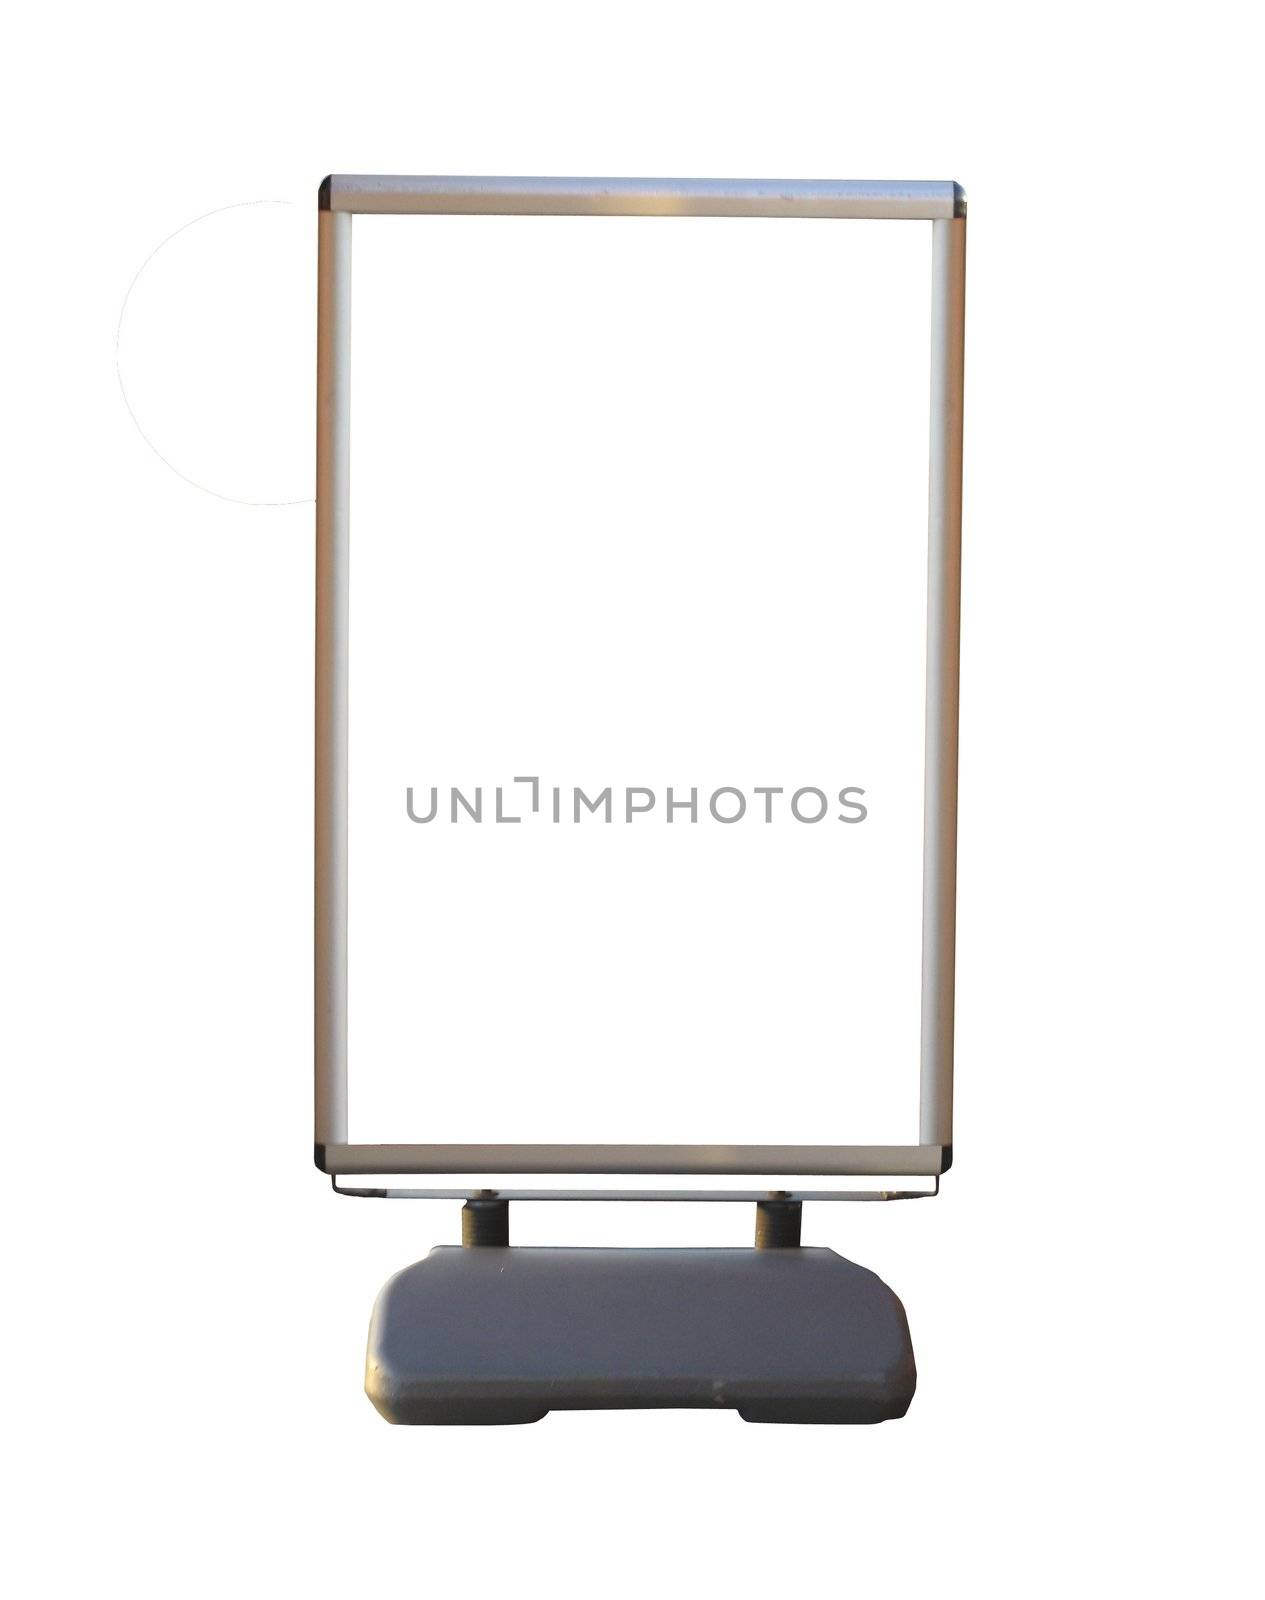 free standing sign with blank white space for copy type text